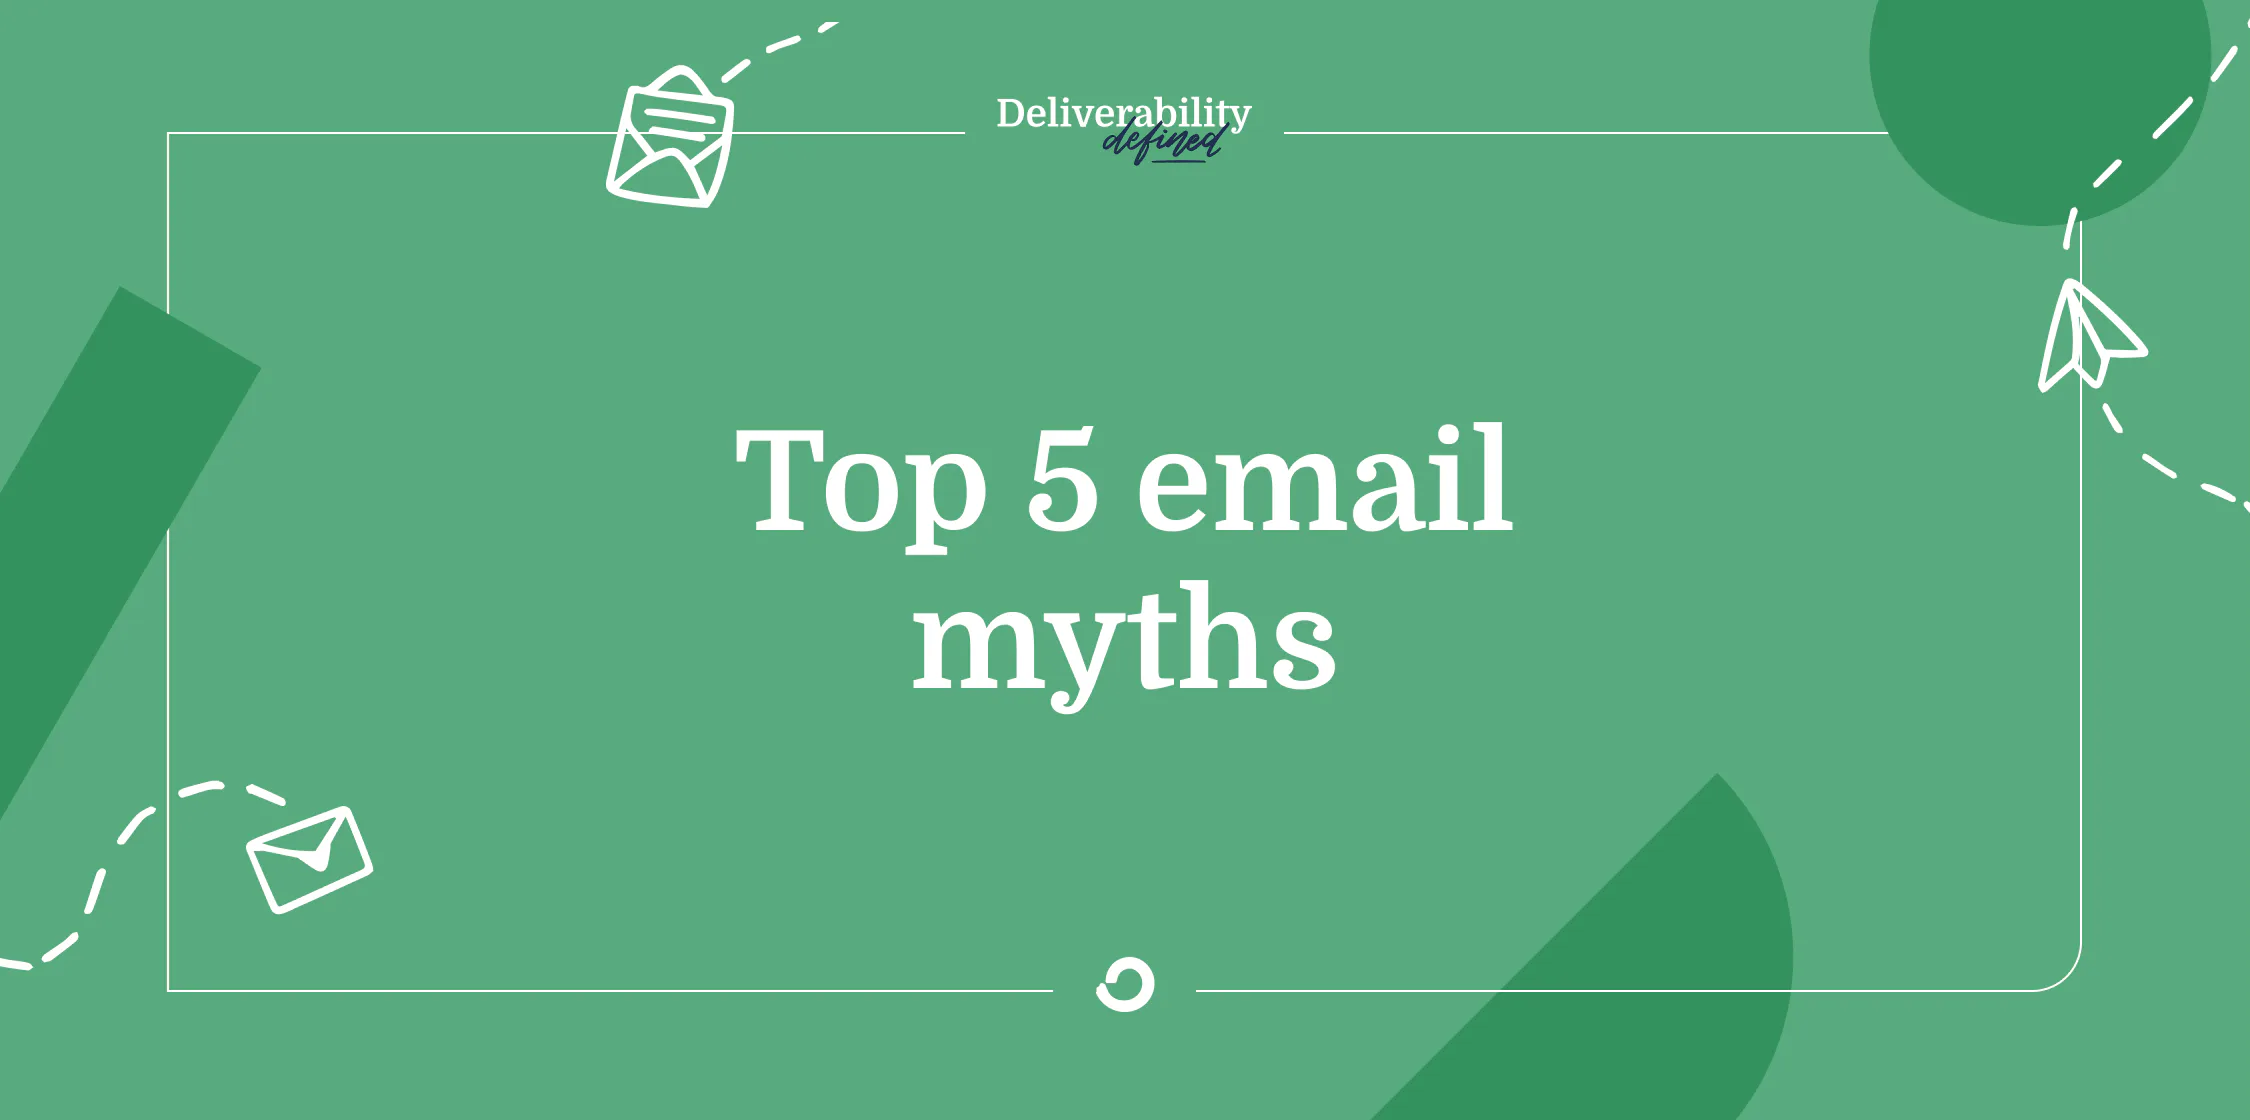 Top 5 email myths